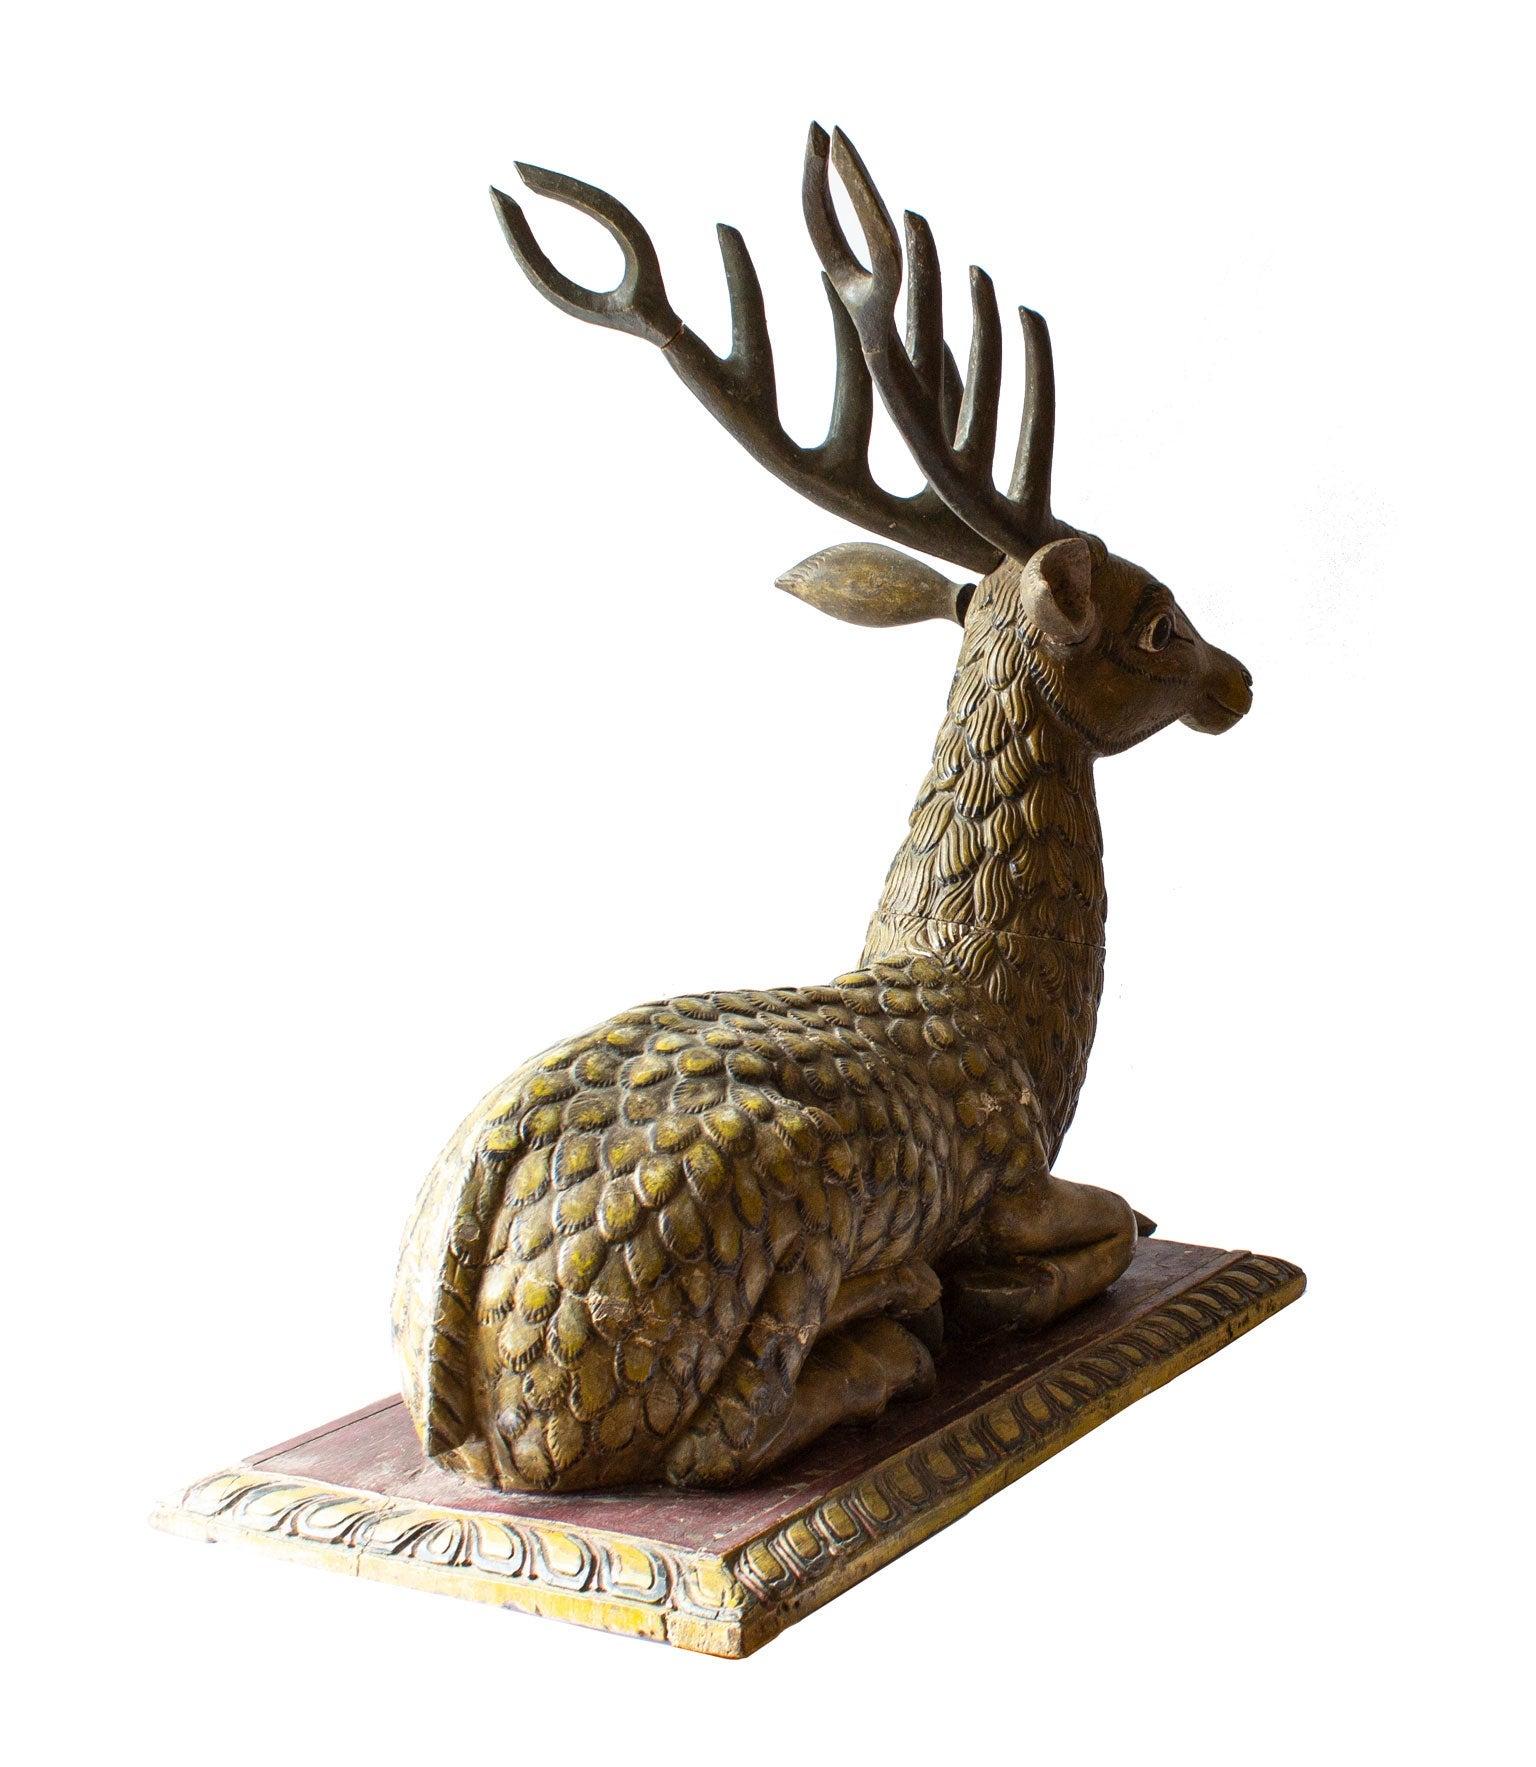 Swedish Big Hand Carved Painted Stag Sculpture in Wood, Early 18th Century For Sale